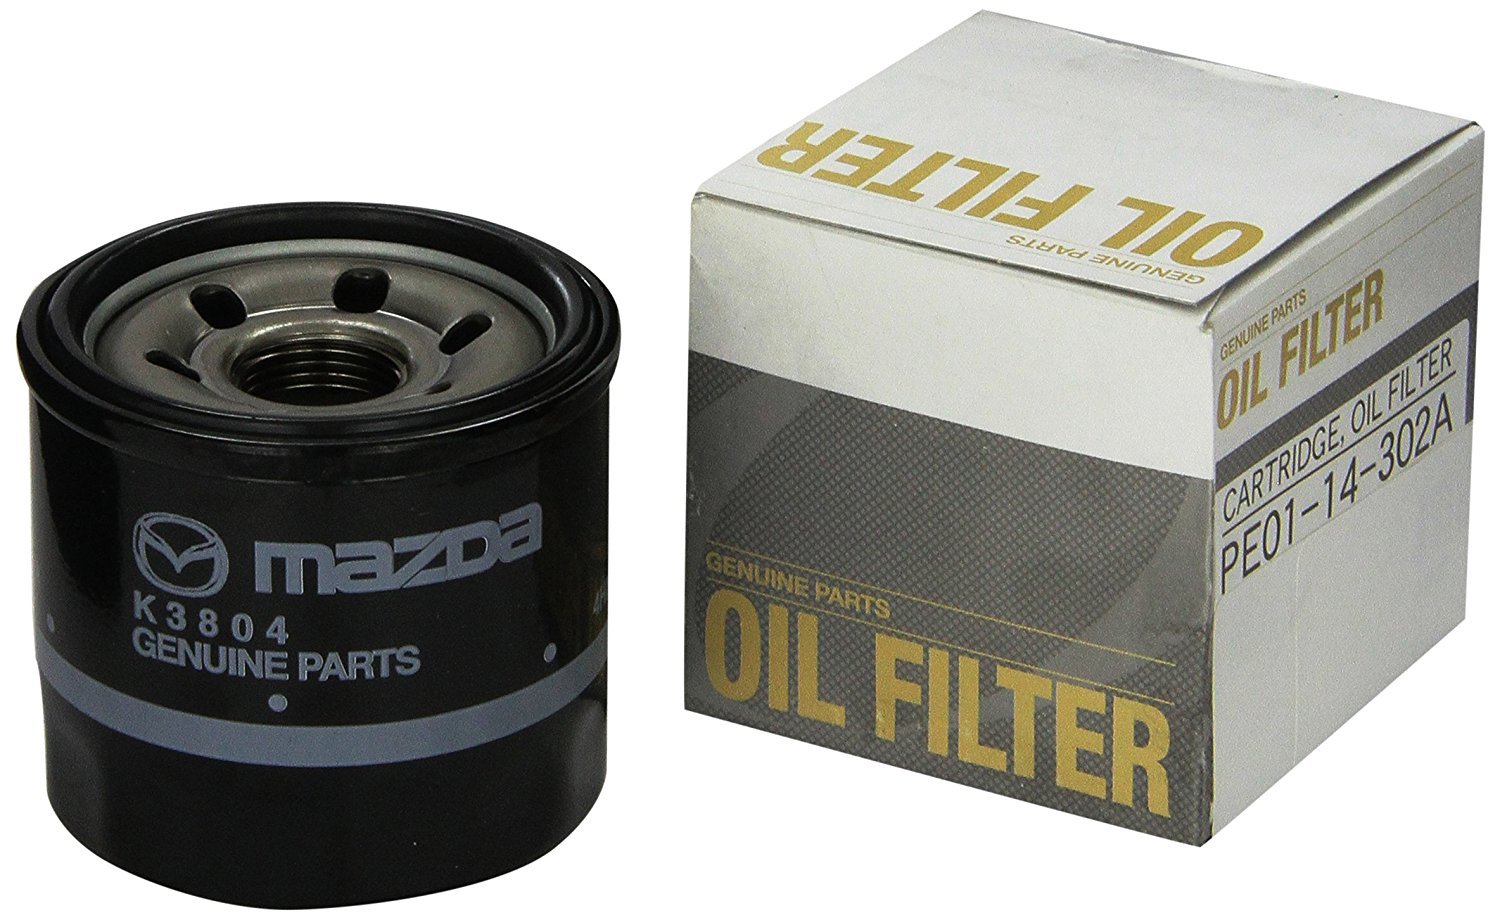 Who Makes Mazda Oil Filters